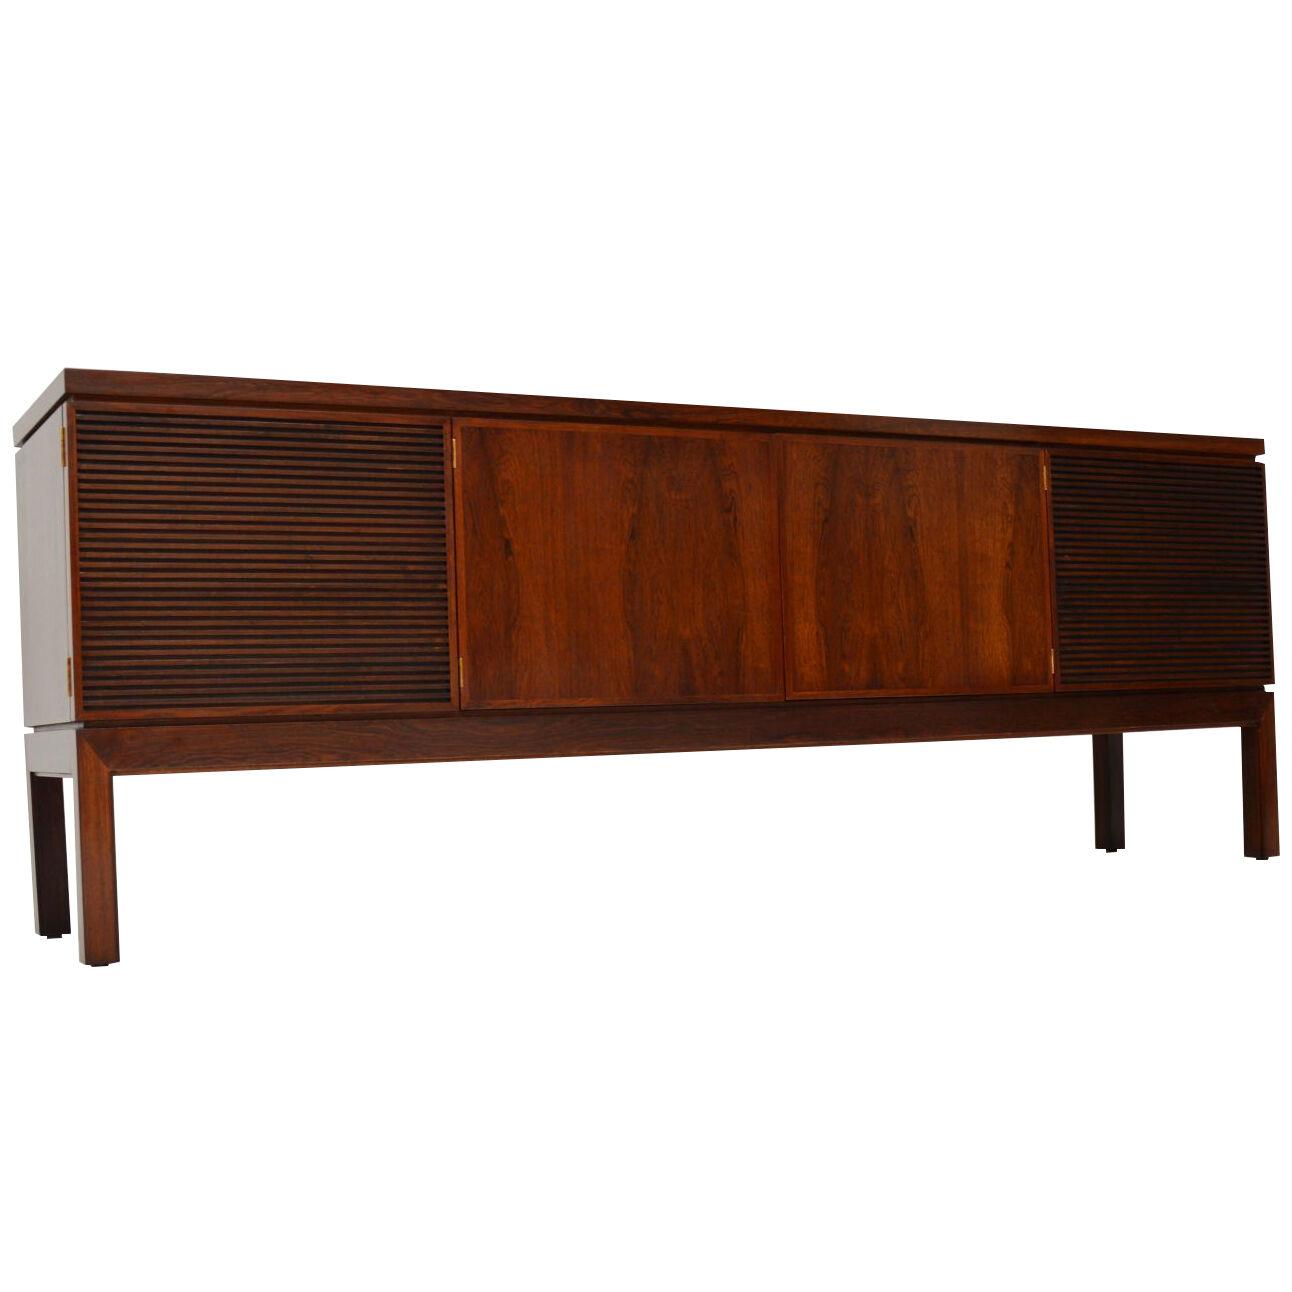 Rosewood Vintage Sideboard by Robert Heritage for Archie Shine